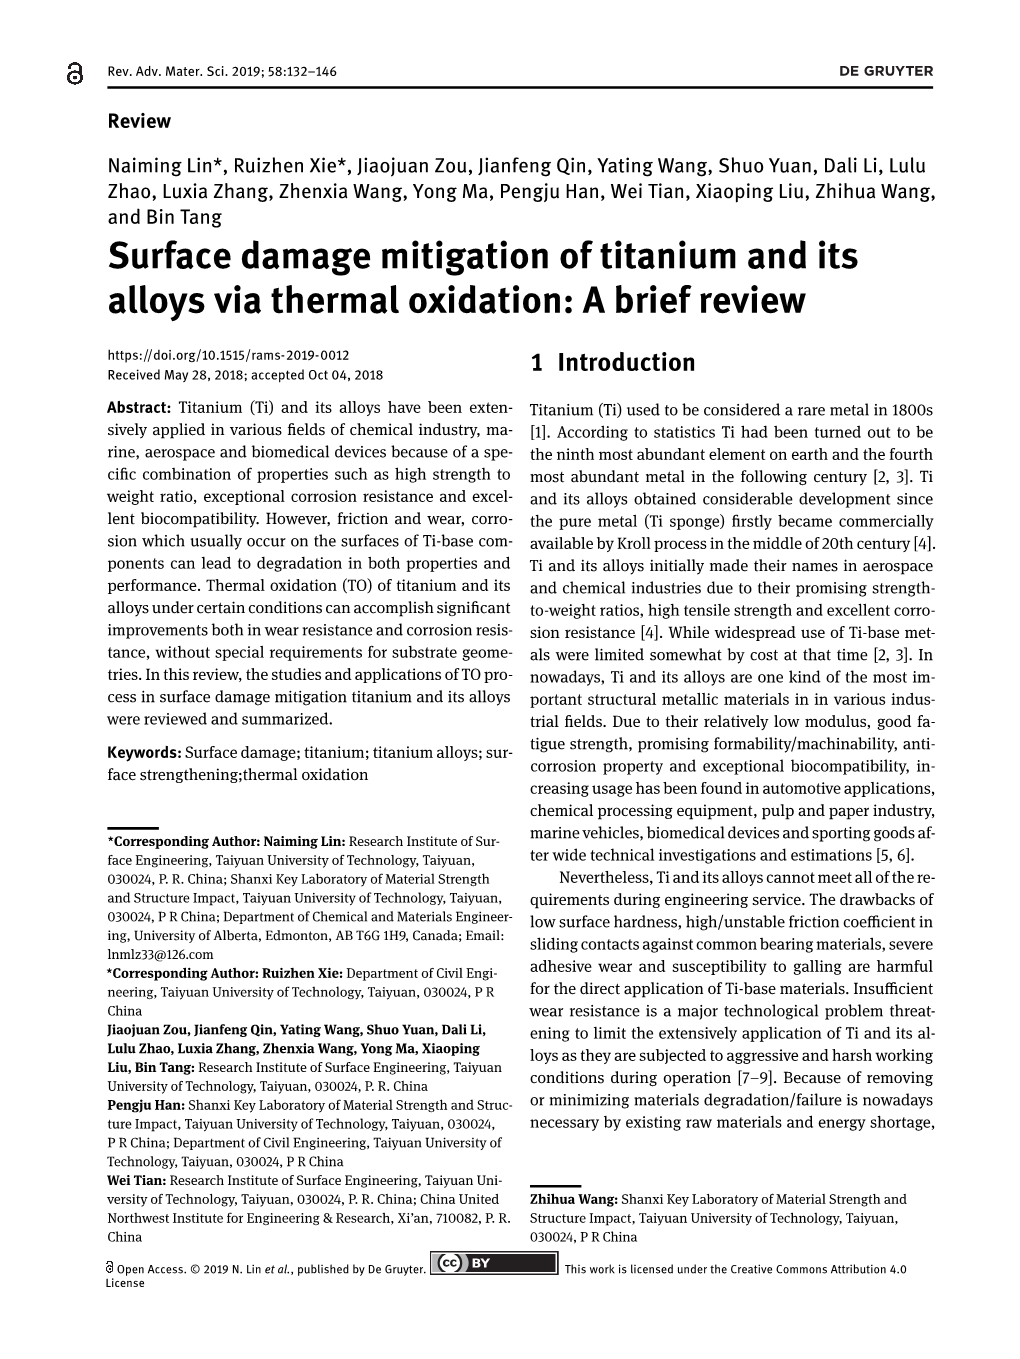 Surface Damage Mitigation of Titanium and Its Alloys Via Thermal Oxidation